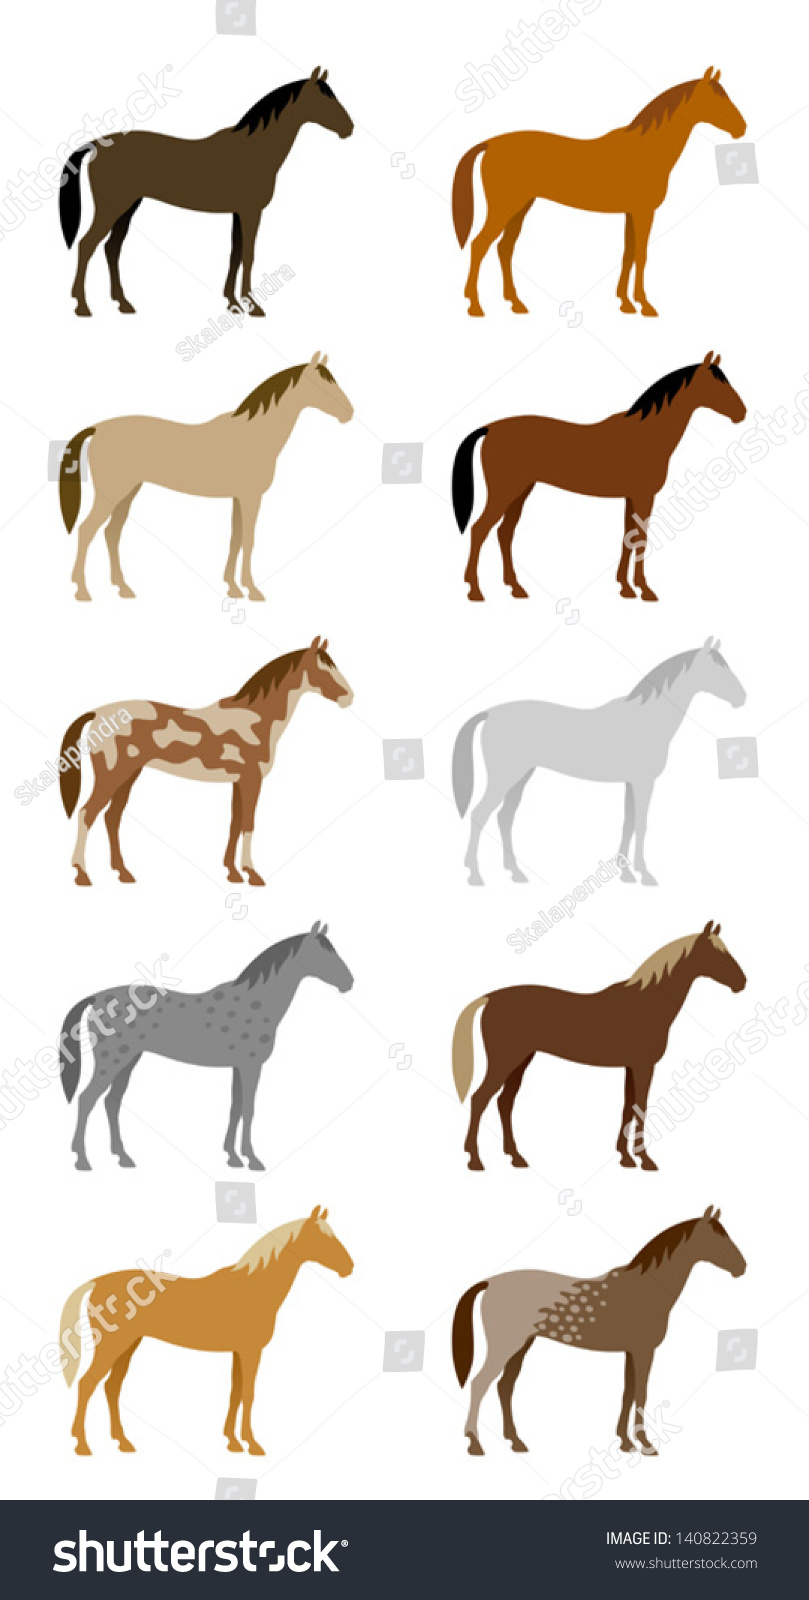 8 Speckled horse drawings black and white Images, Stock Photos ...